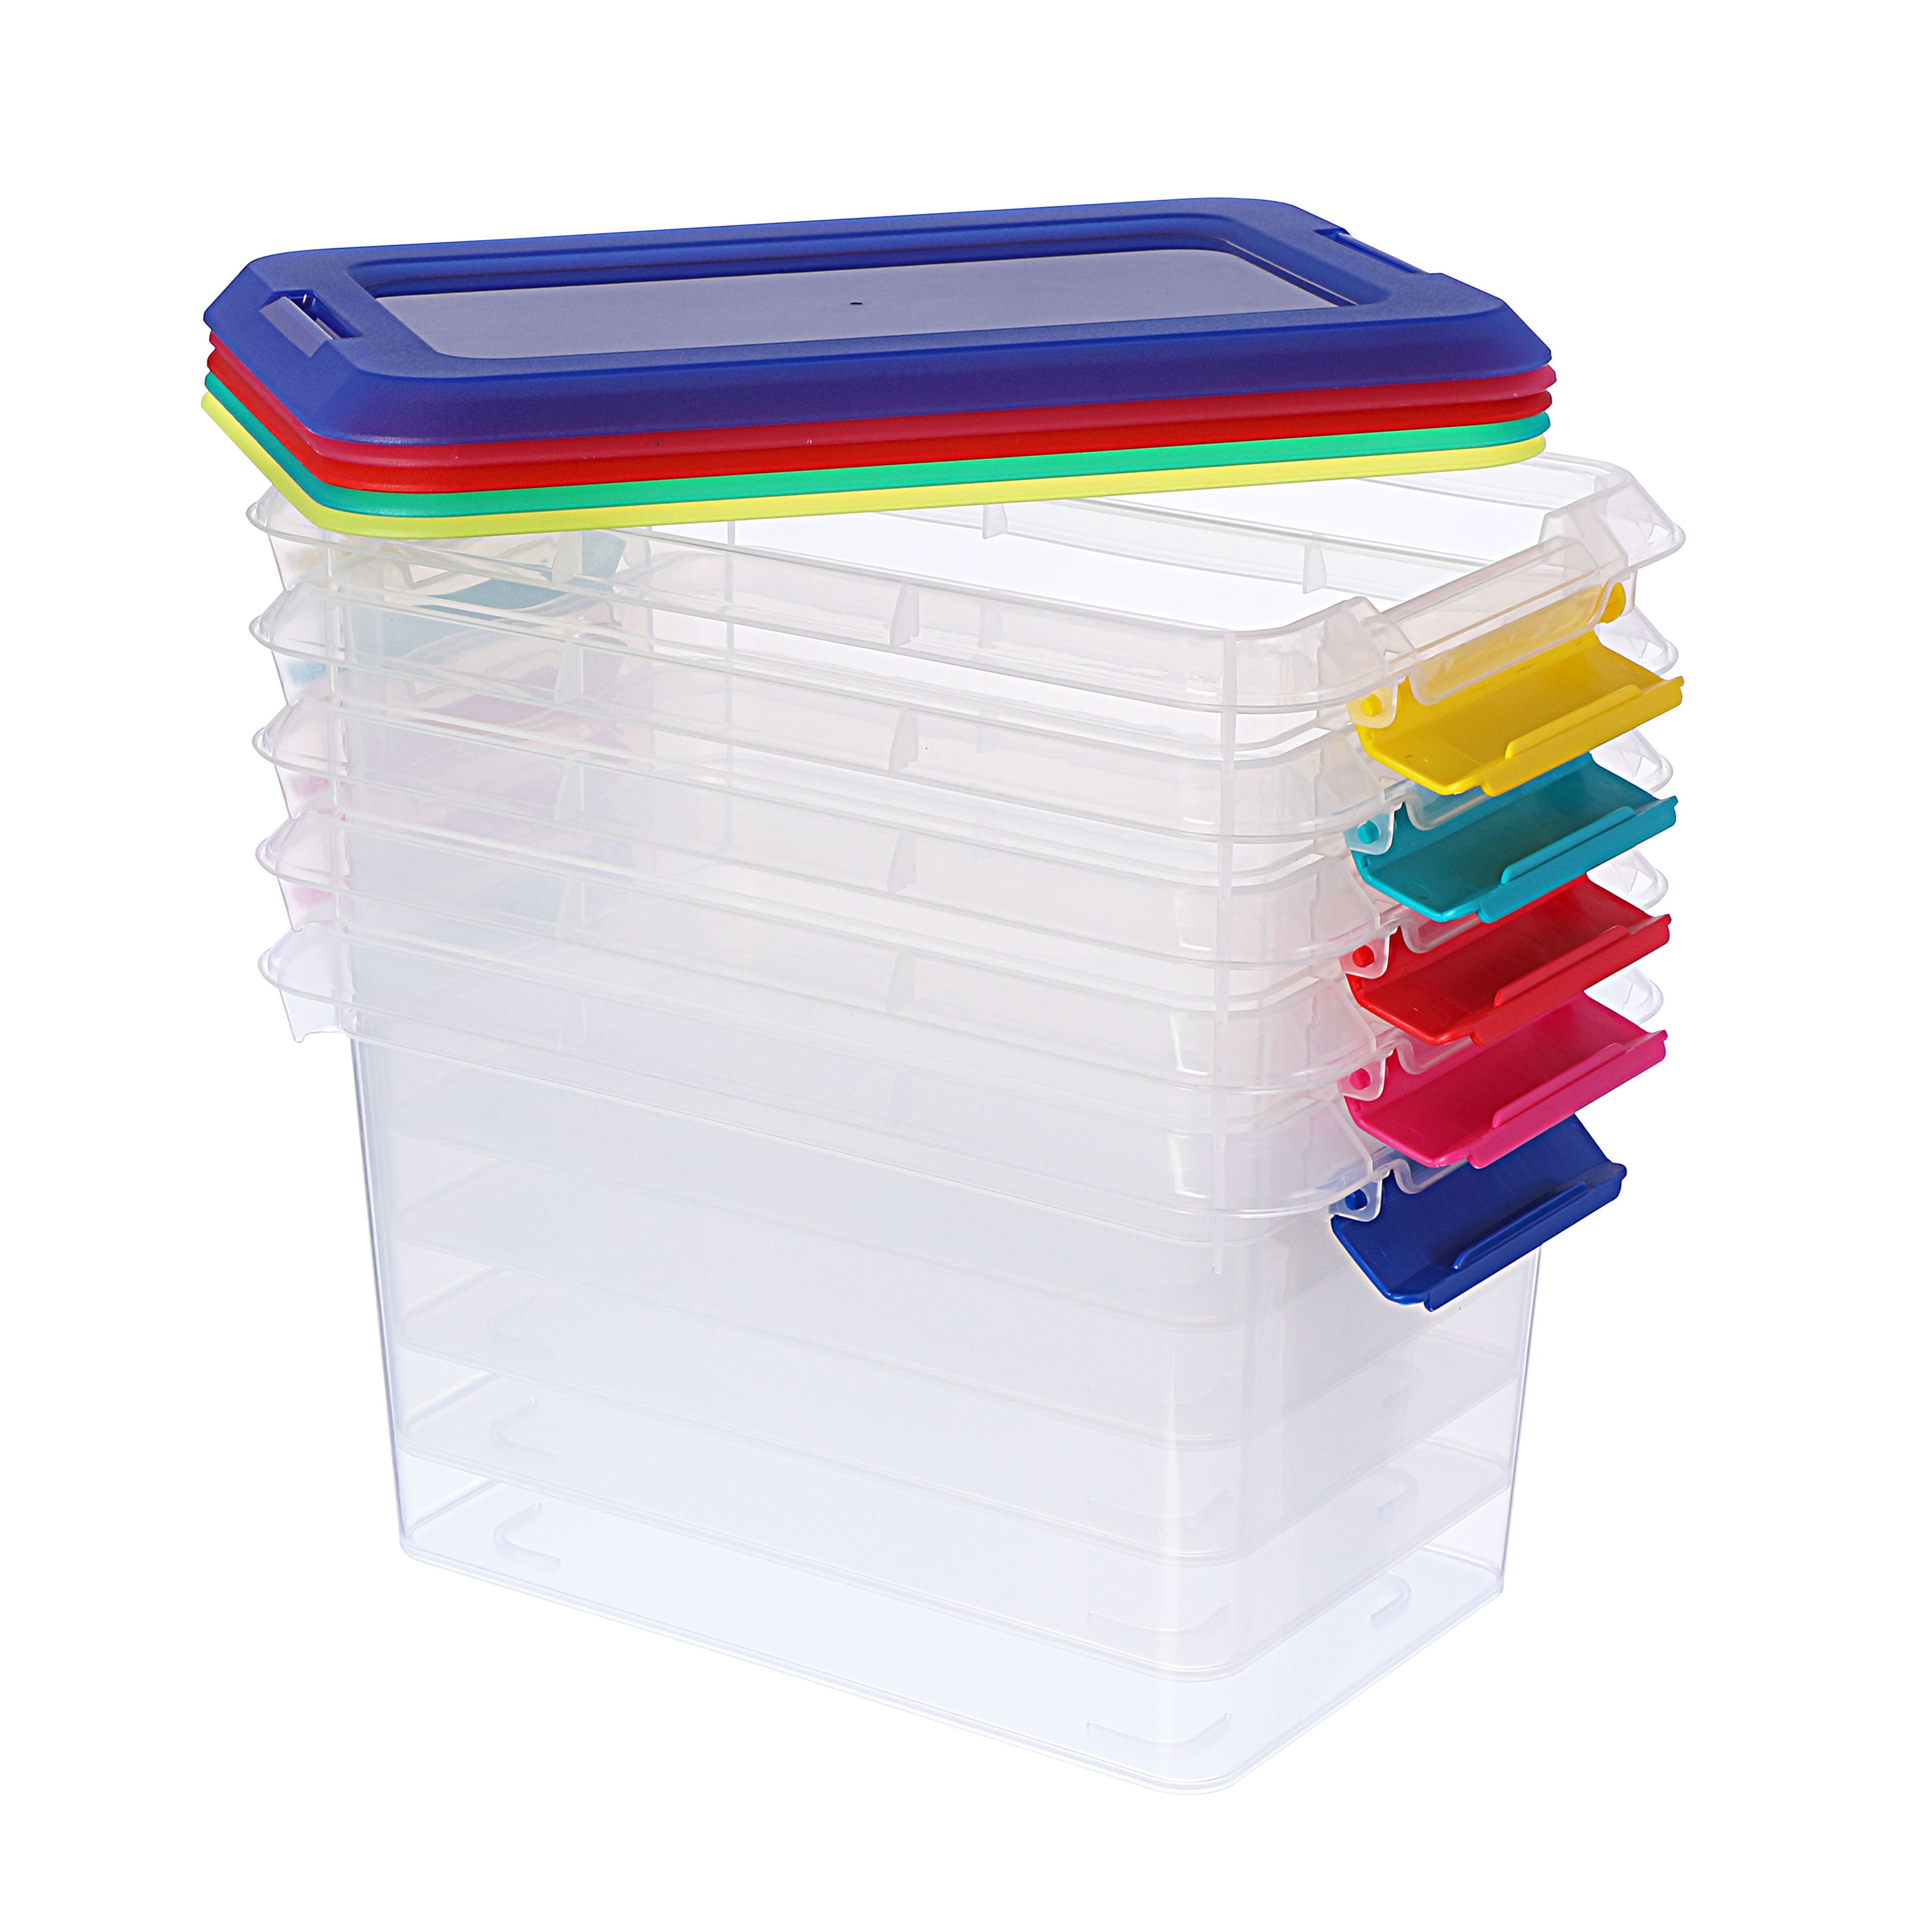 6 Packs: 5 ct. (30 total) 6.2qt. Storage Bins with Lids by Simply